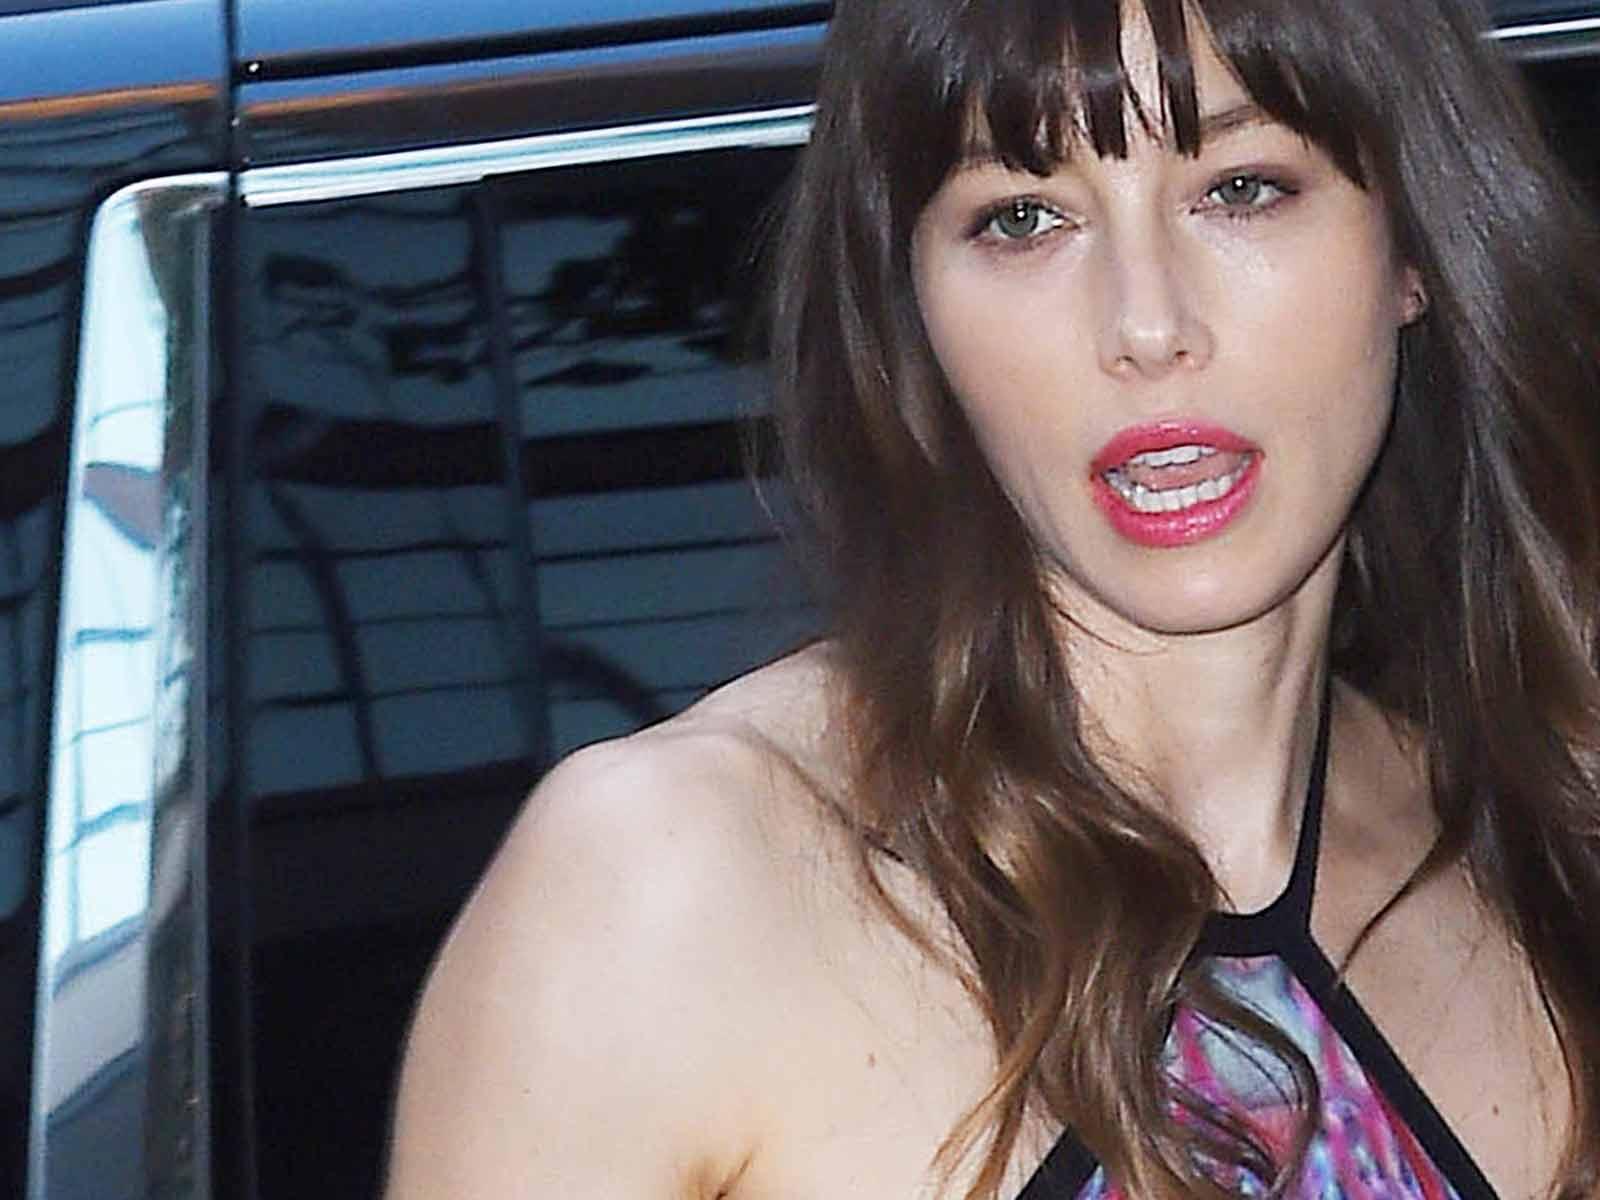 Jessica Biel and Partners Accused of Stealing Hundreds of Thousands of Dollars From Restaurant Employees